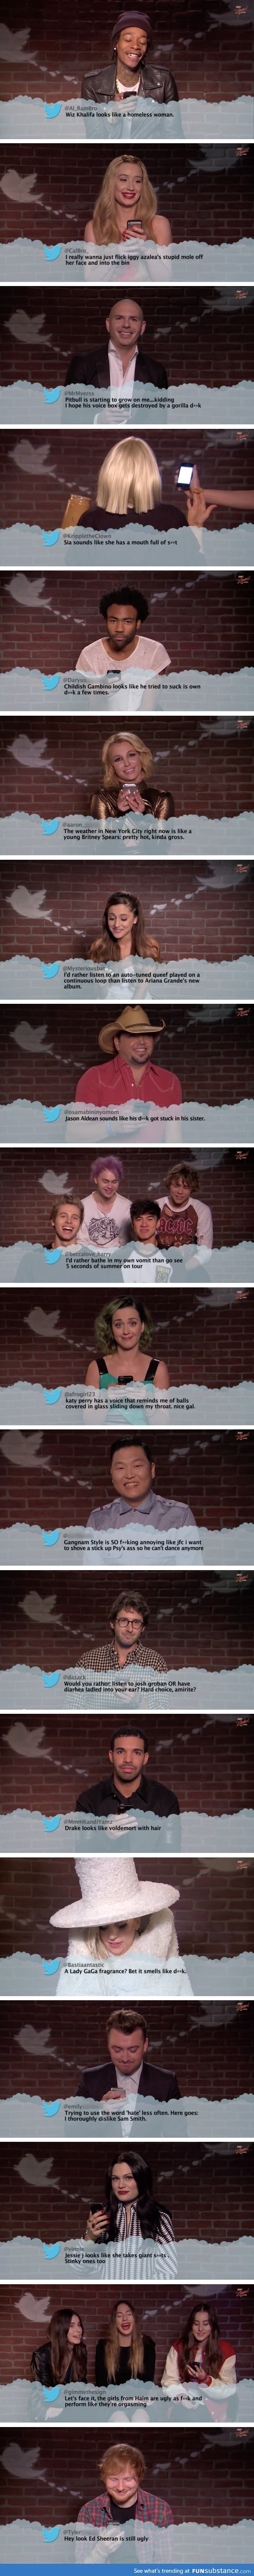 Celebrities reading mean tweets about themselves